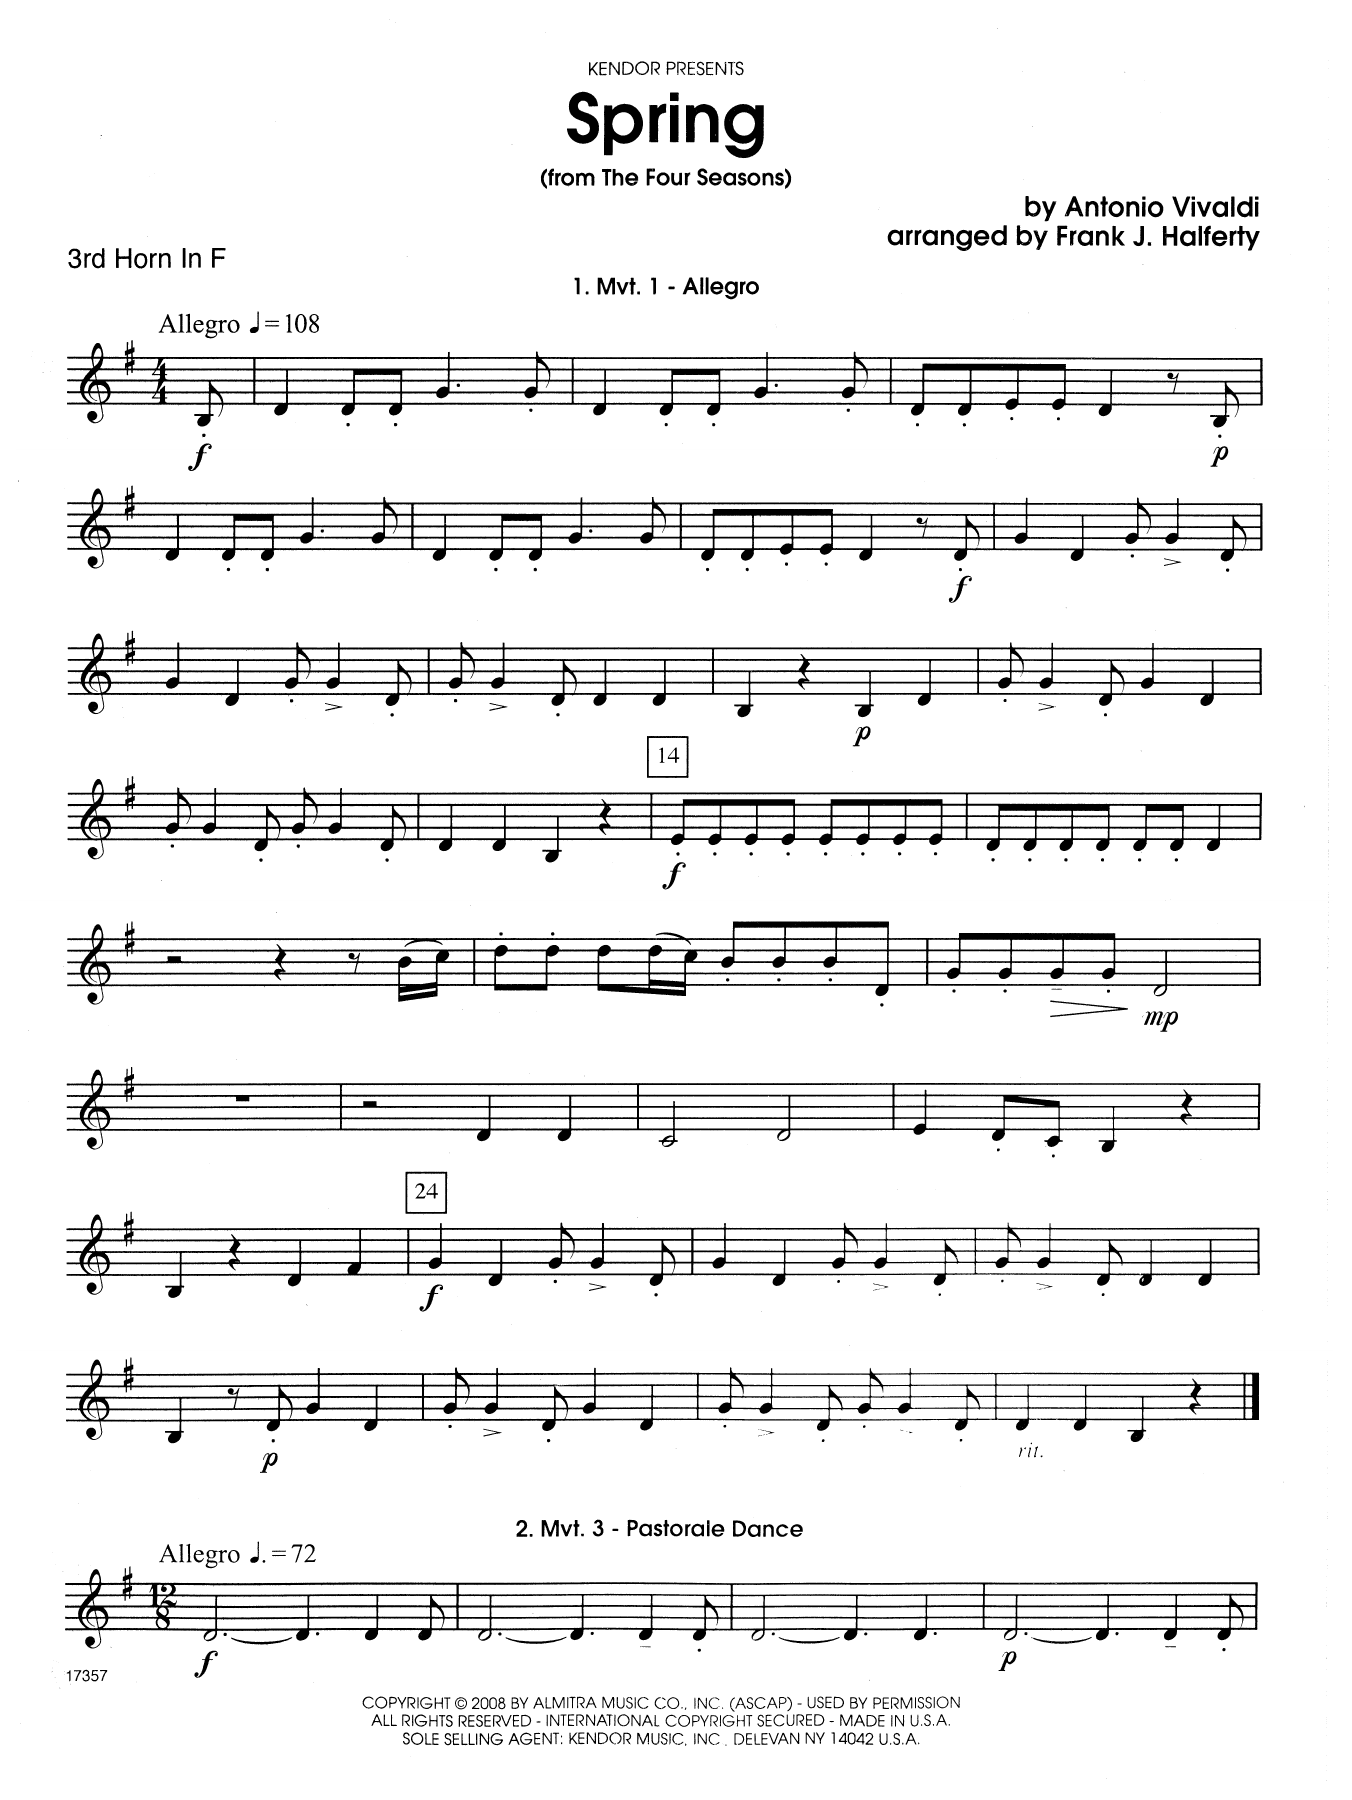 Download Frank J. Halferty Spring (from The Four Seasons) - 3rd Ho Sheet Music